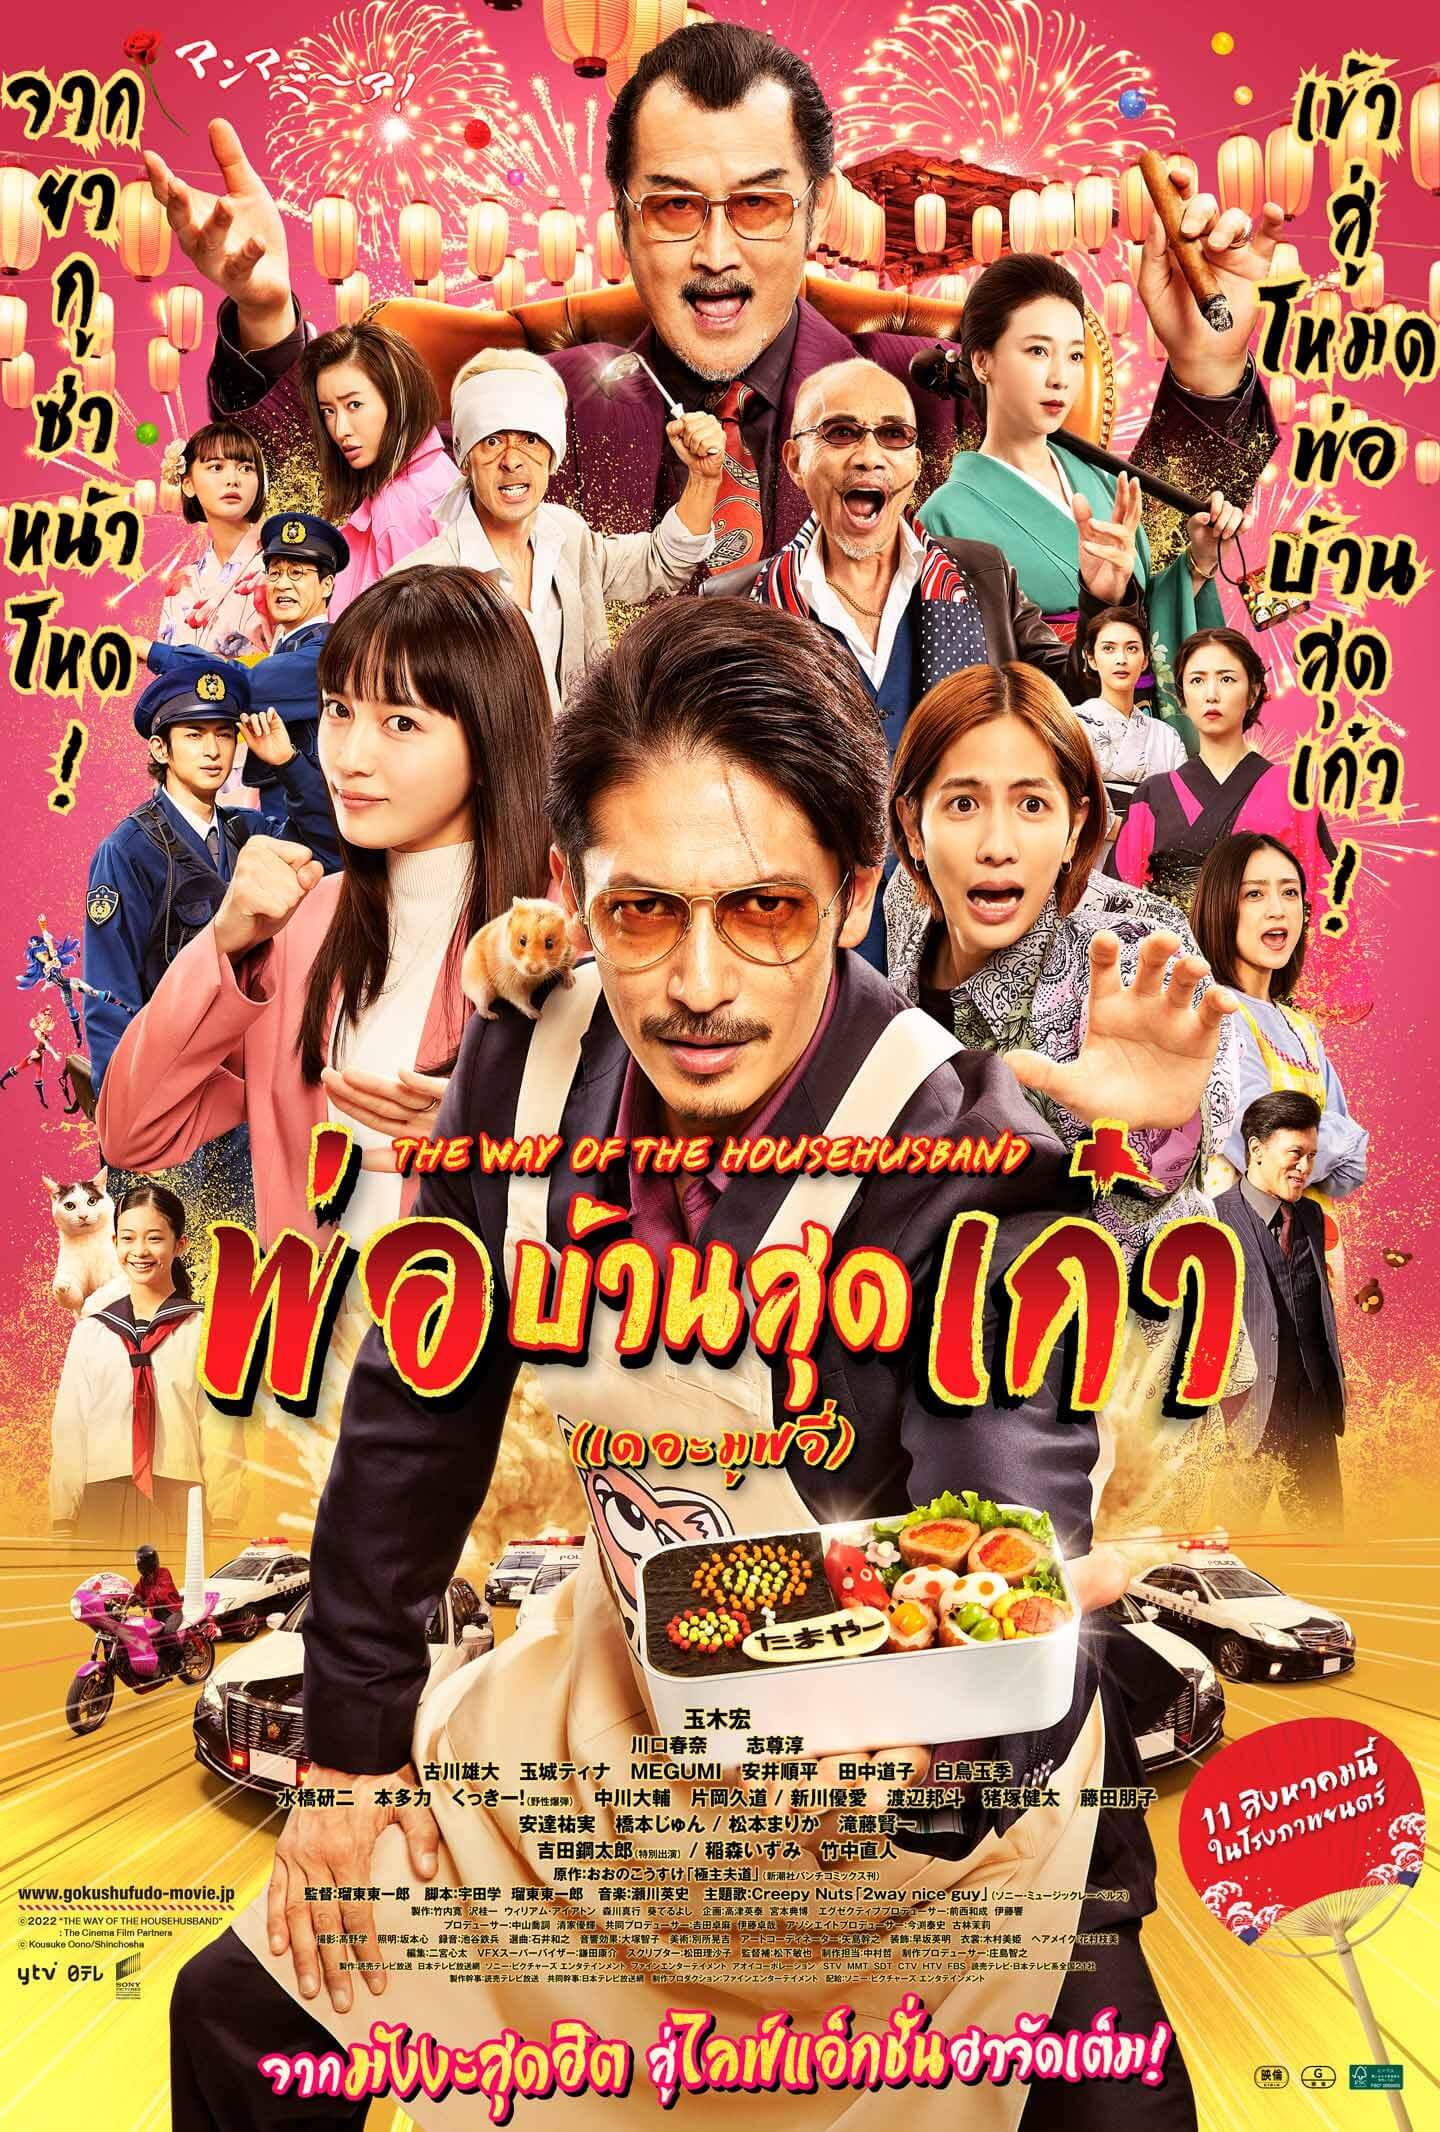 The Way Of The Househusband The Movie Poster